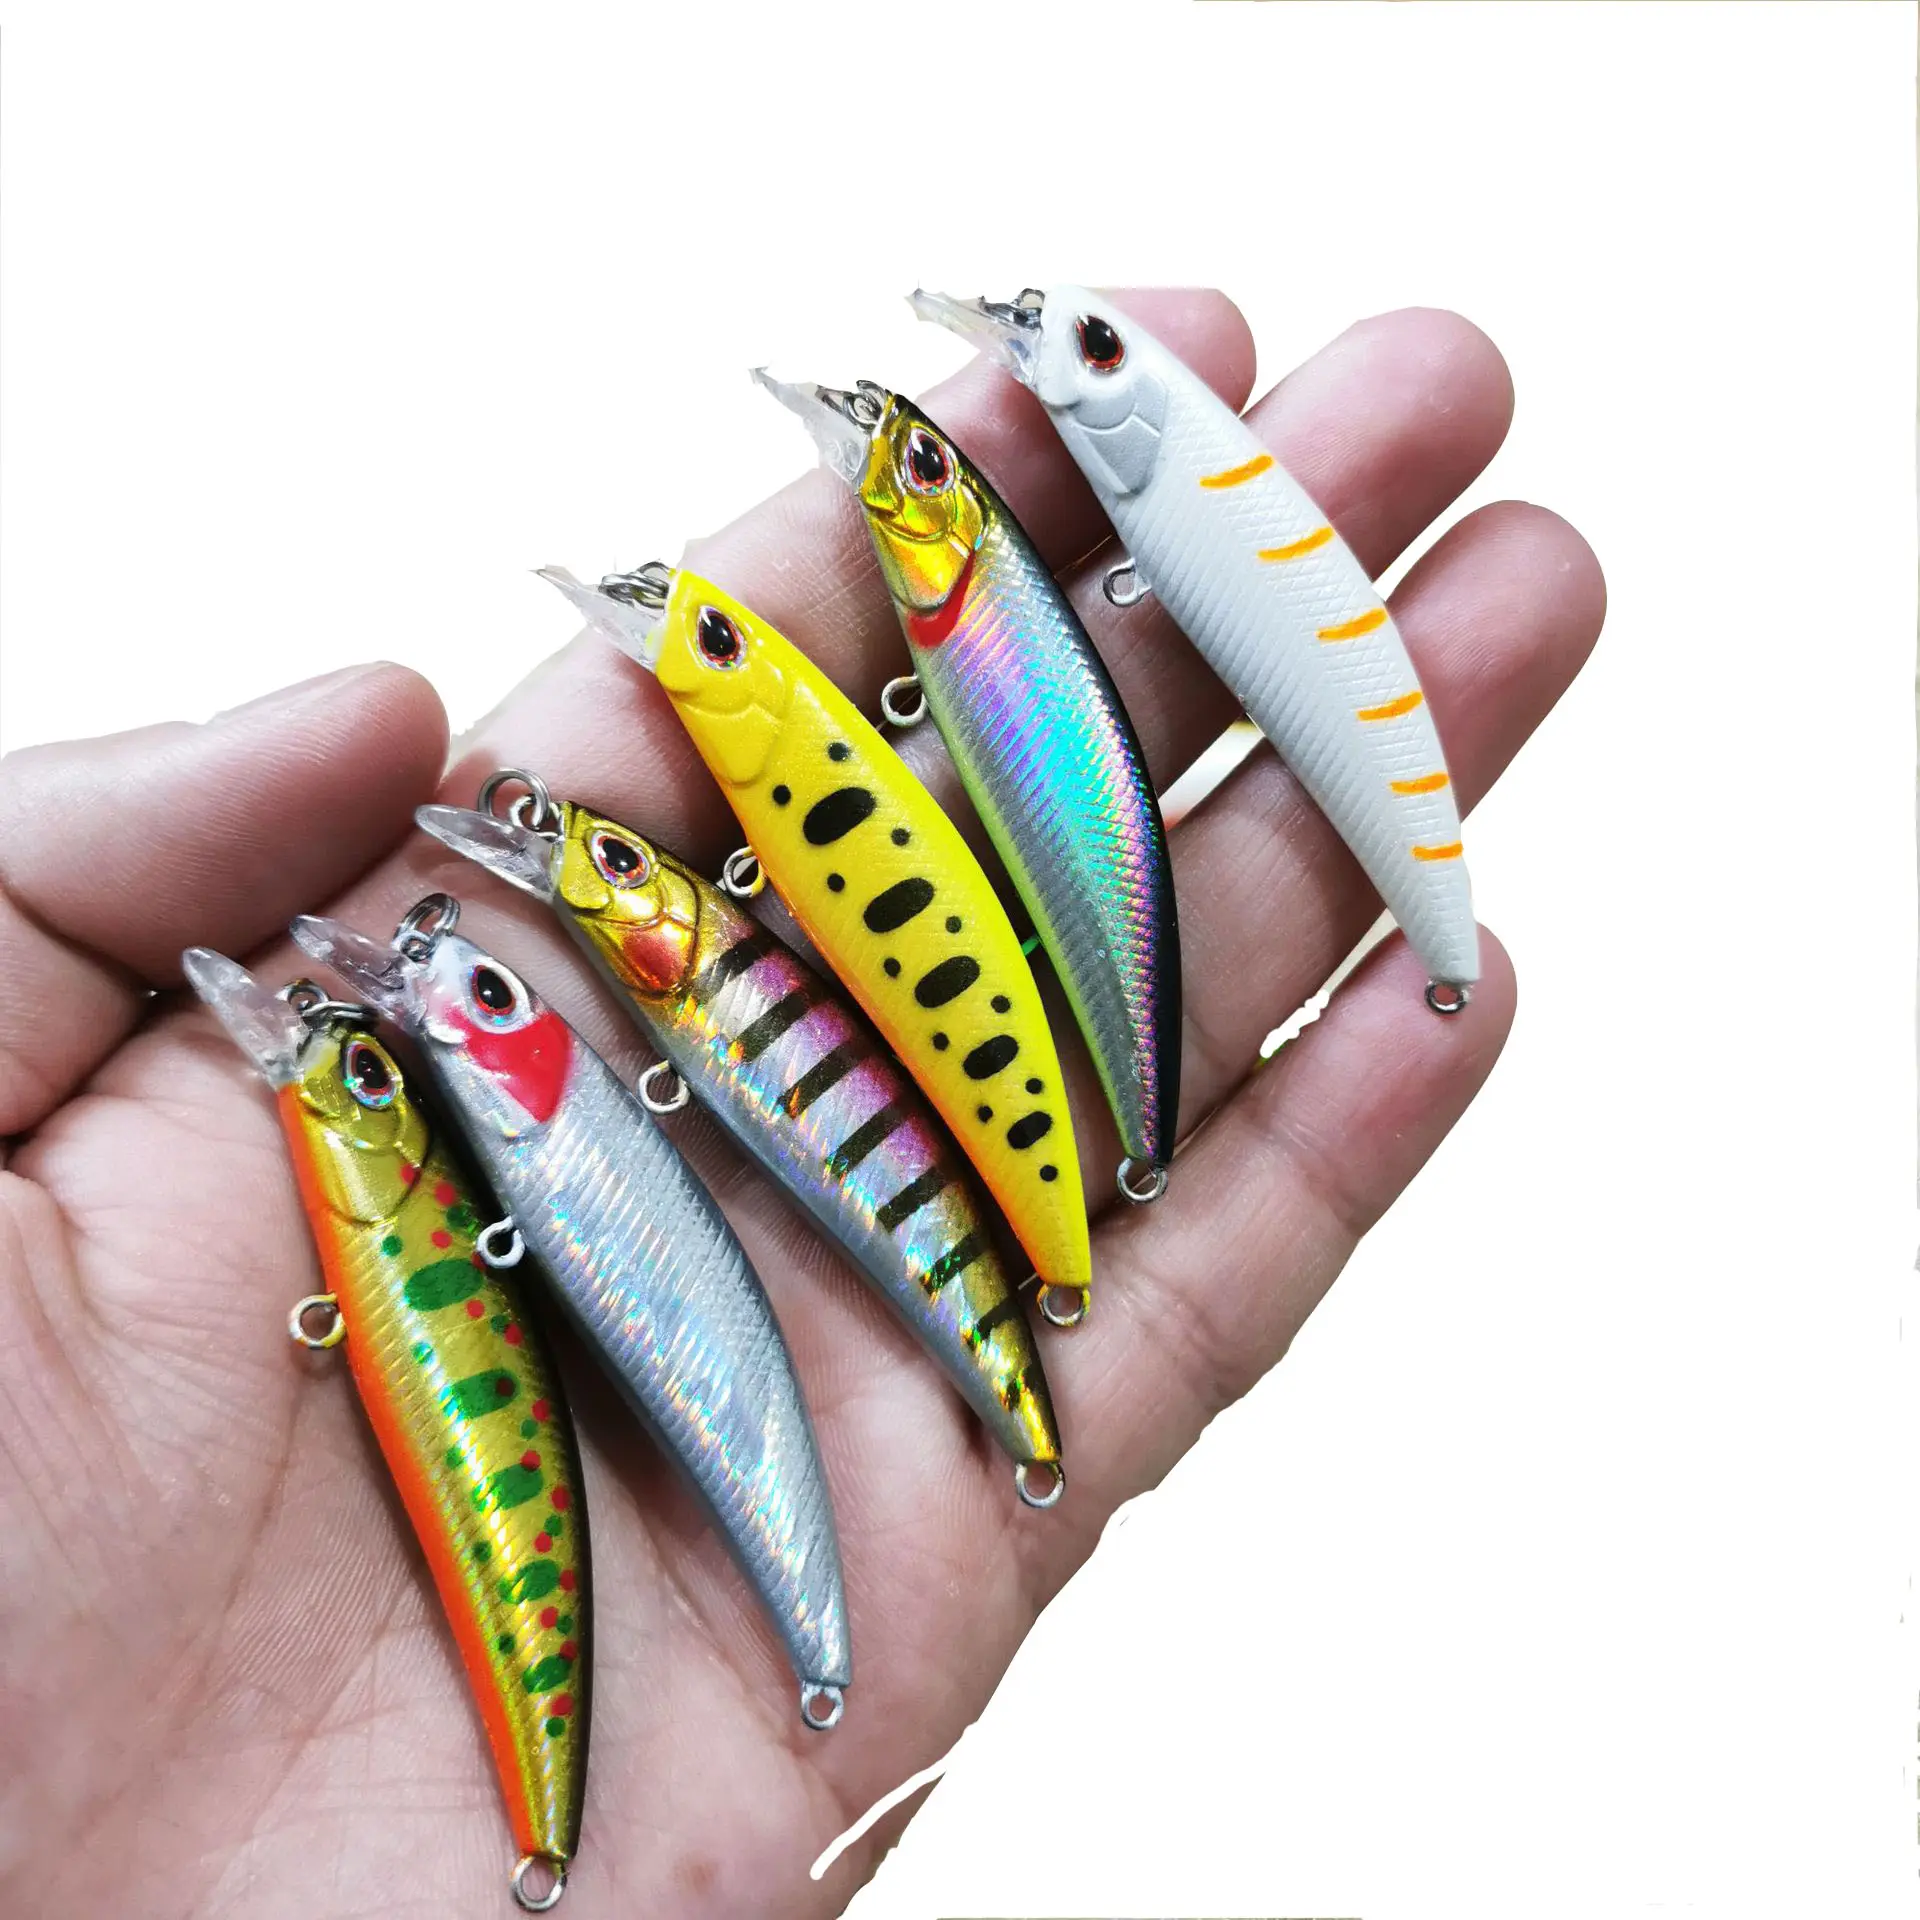 10 Color 60mm 6.5g Hard Bait Minnow Fishing Lures Tackle black sinking minnow Cheapest Fishing Lure